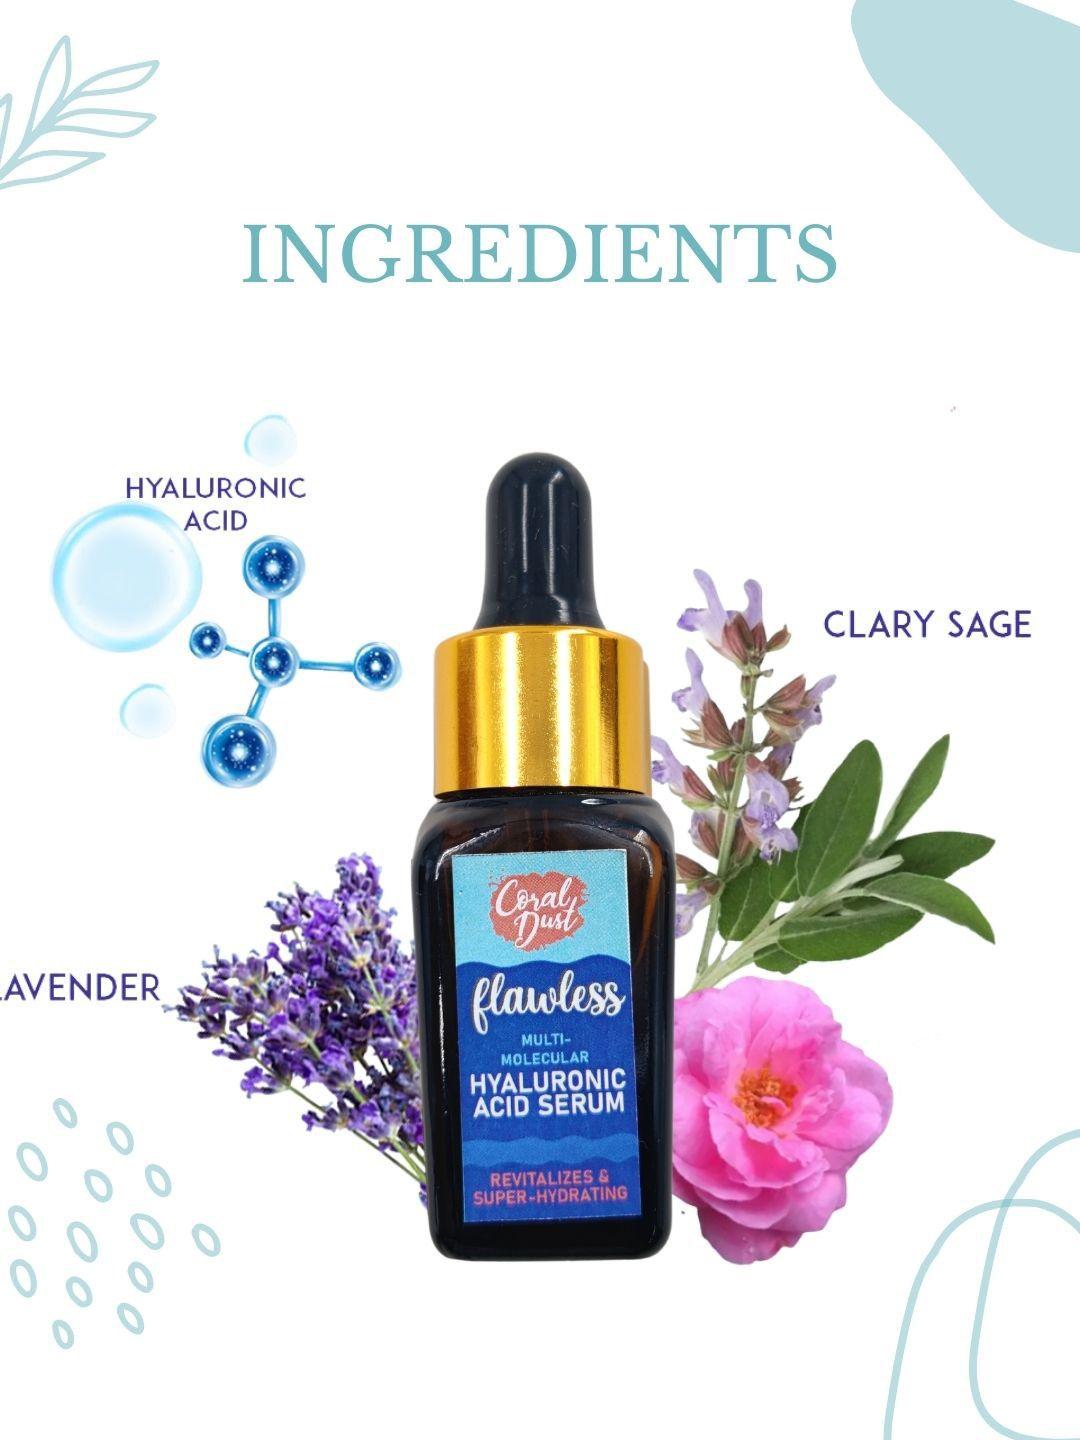 coral dust flawless hylauronic acid face serum with lavender & clary sage - 5 g